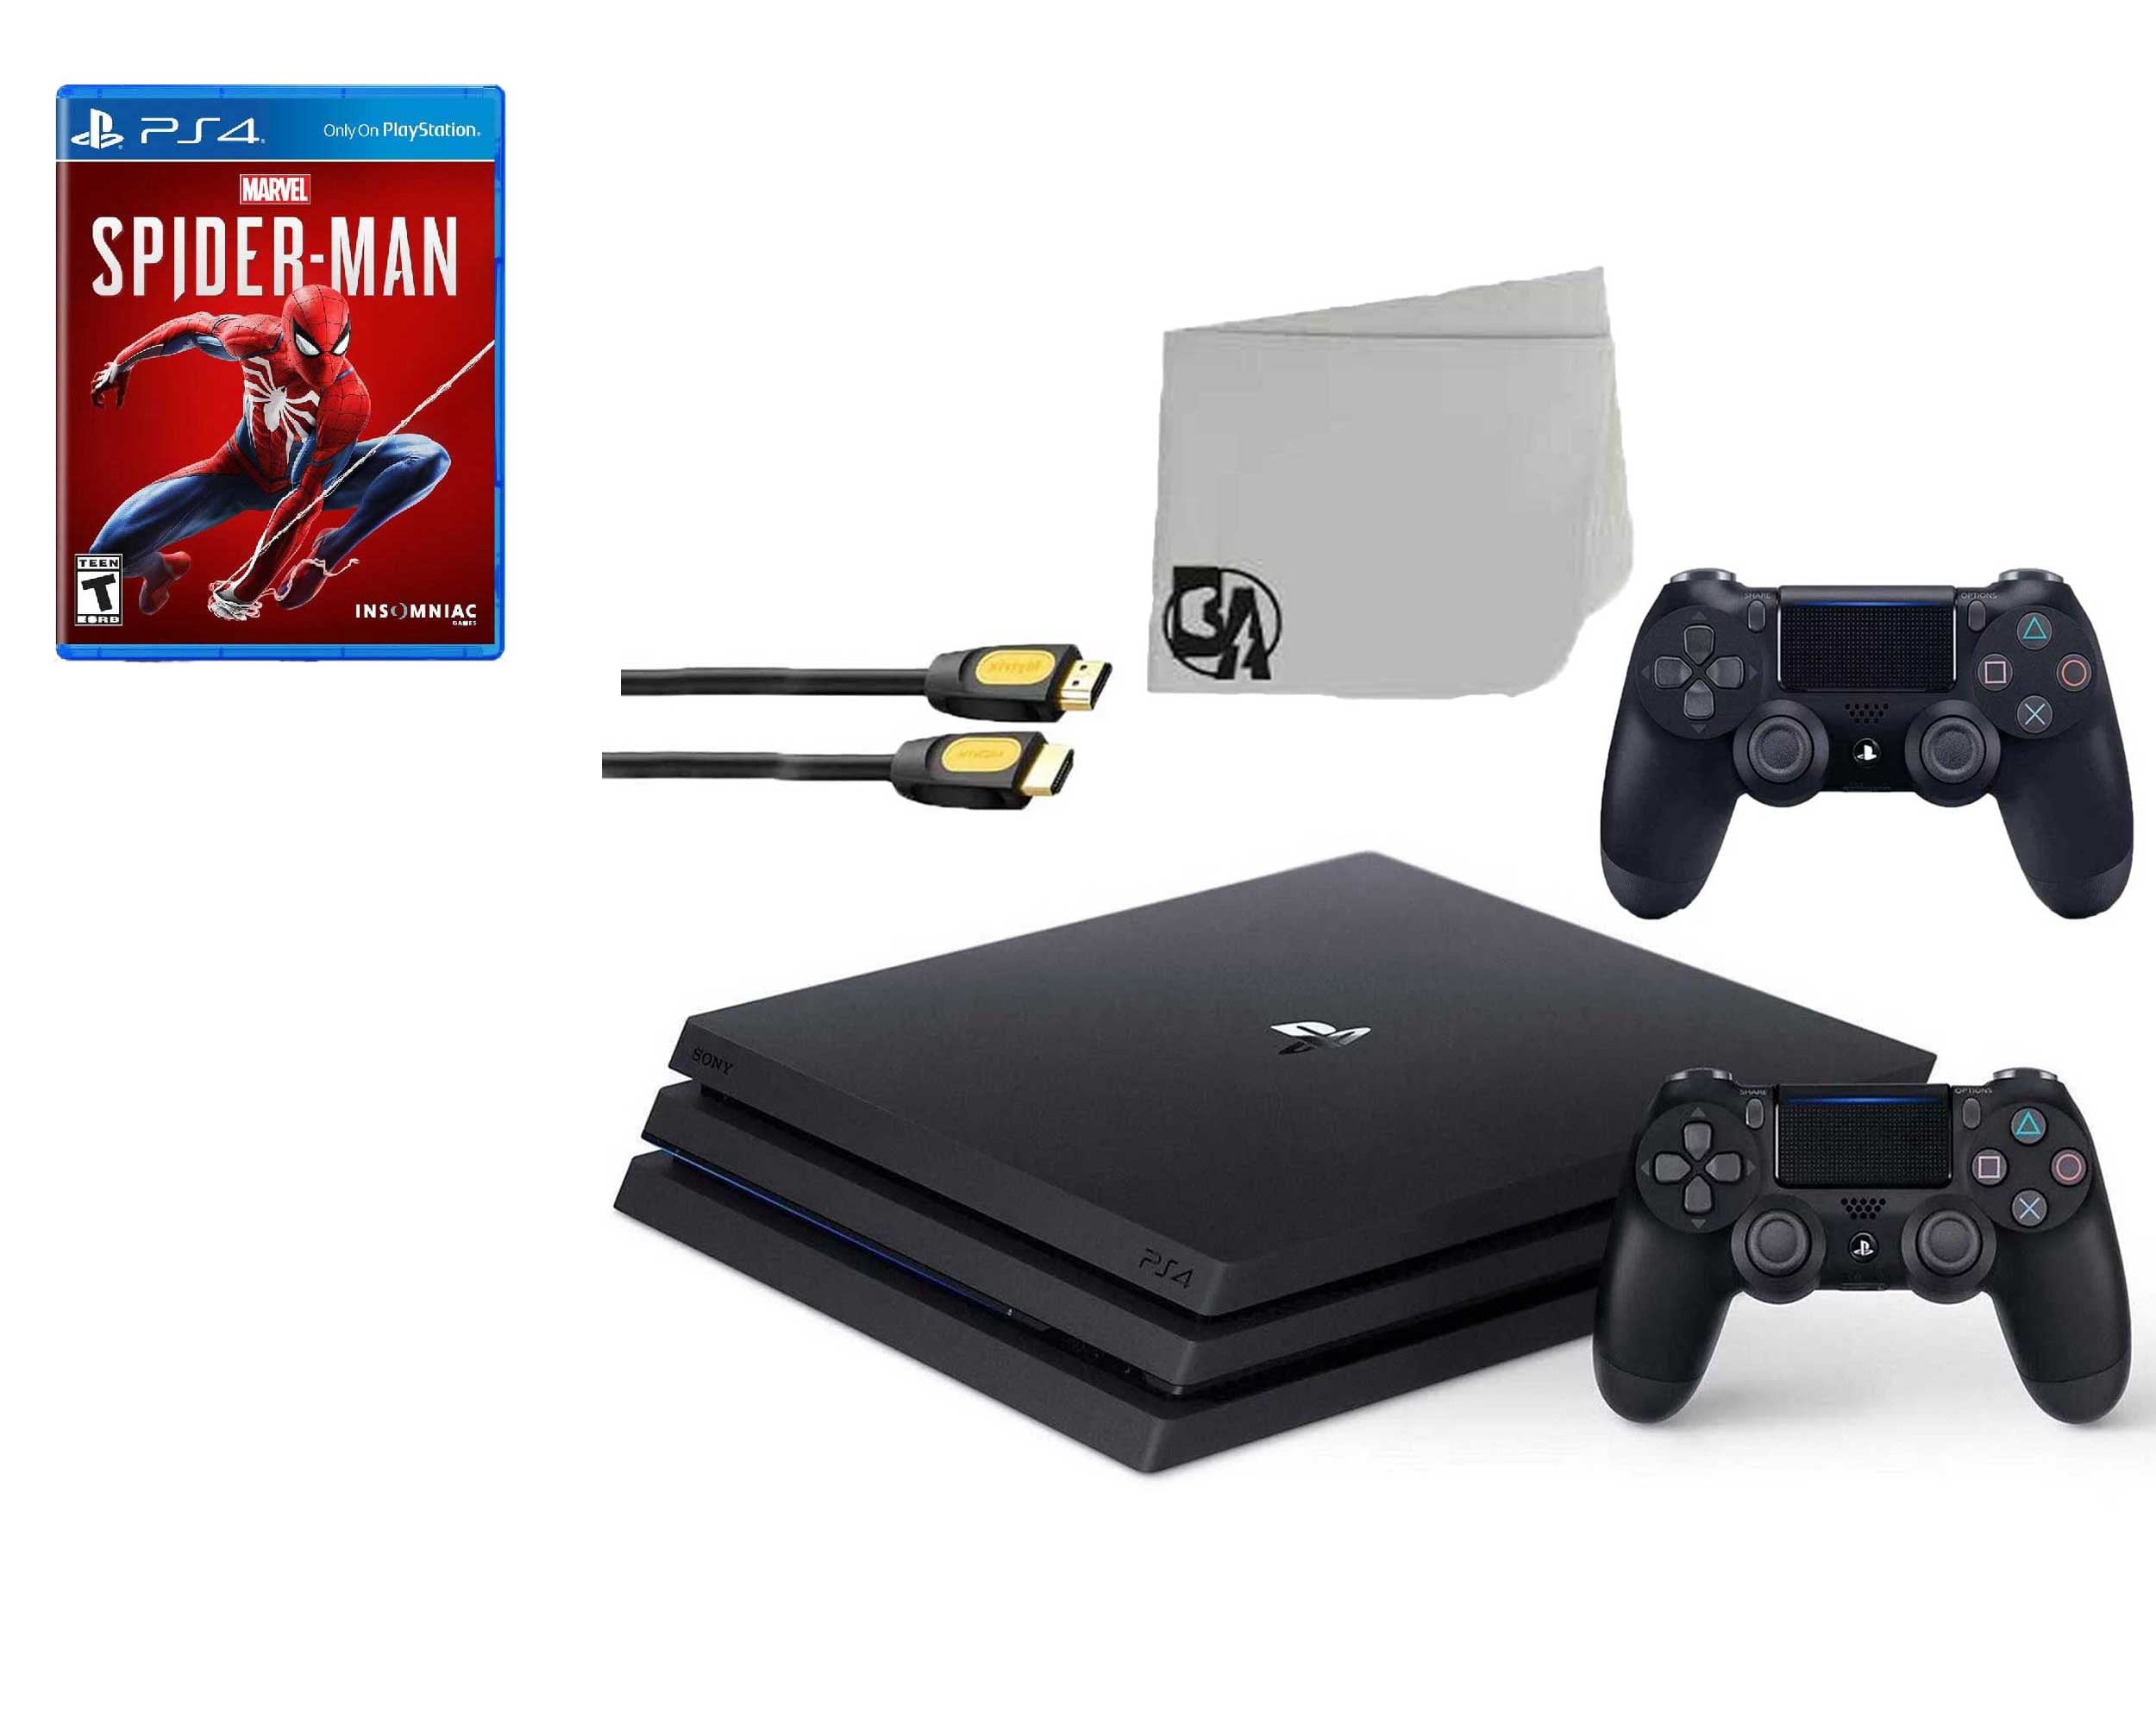 Pre-Owned Sony PlayStation 4 Pro 1TB Gaming Console Black 2 Controller  Included with Spider-Man BOLT AXTION Bundle